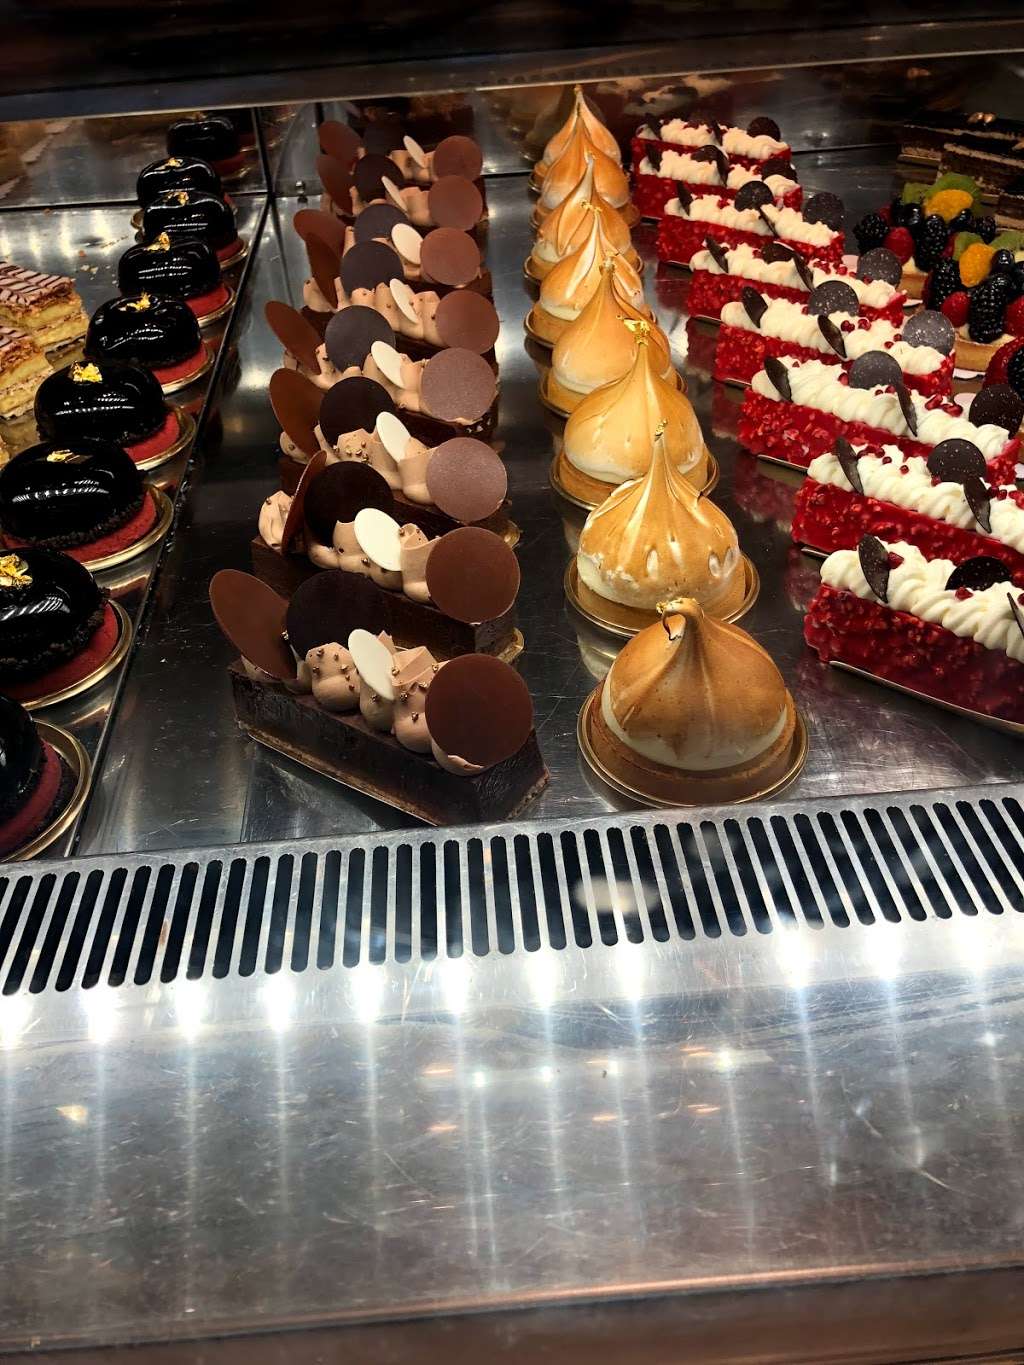 Bellagio Patisserie | MGM National Harbor Resort & Casino, 101 MGM National Ave, Oxon Hill, MD 20745 | Phone: (301) 971-6020